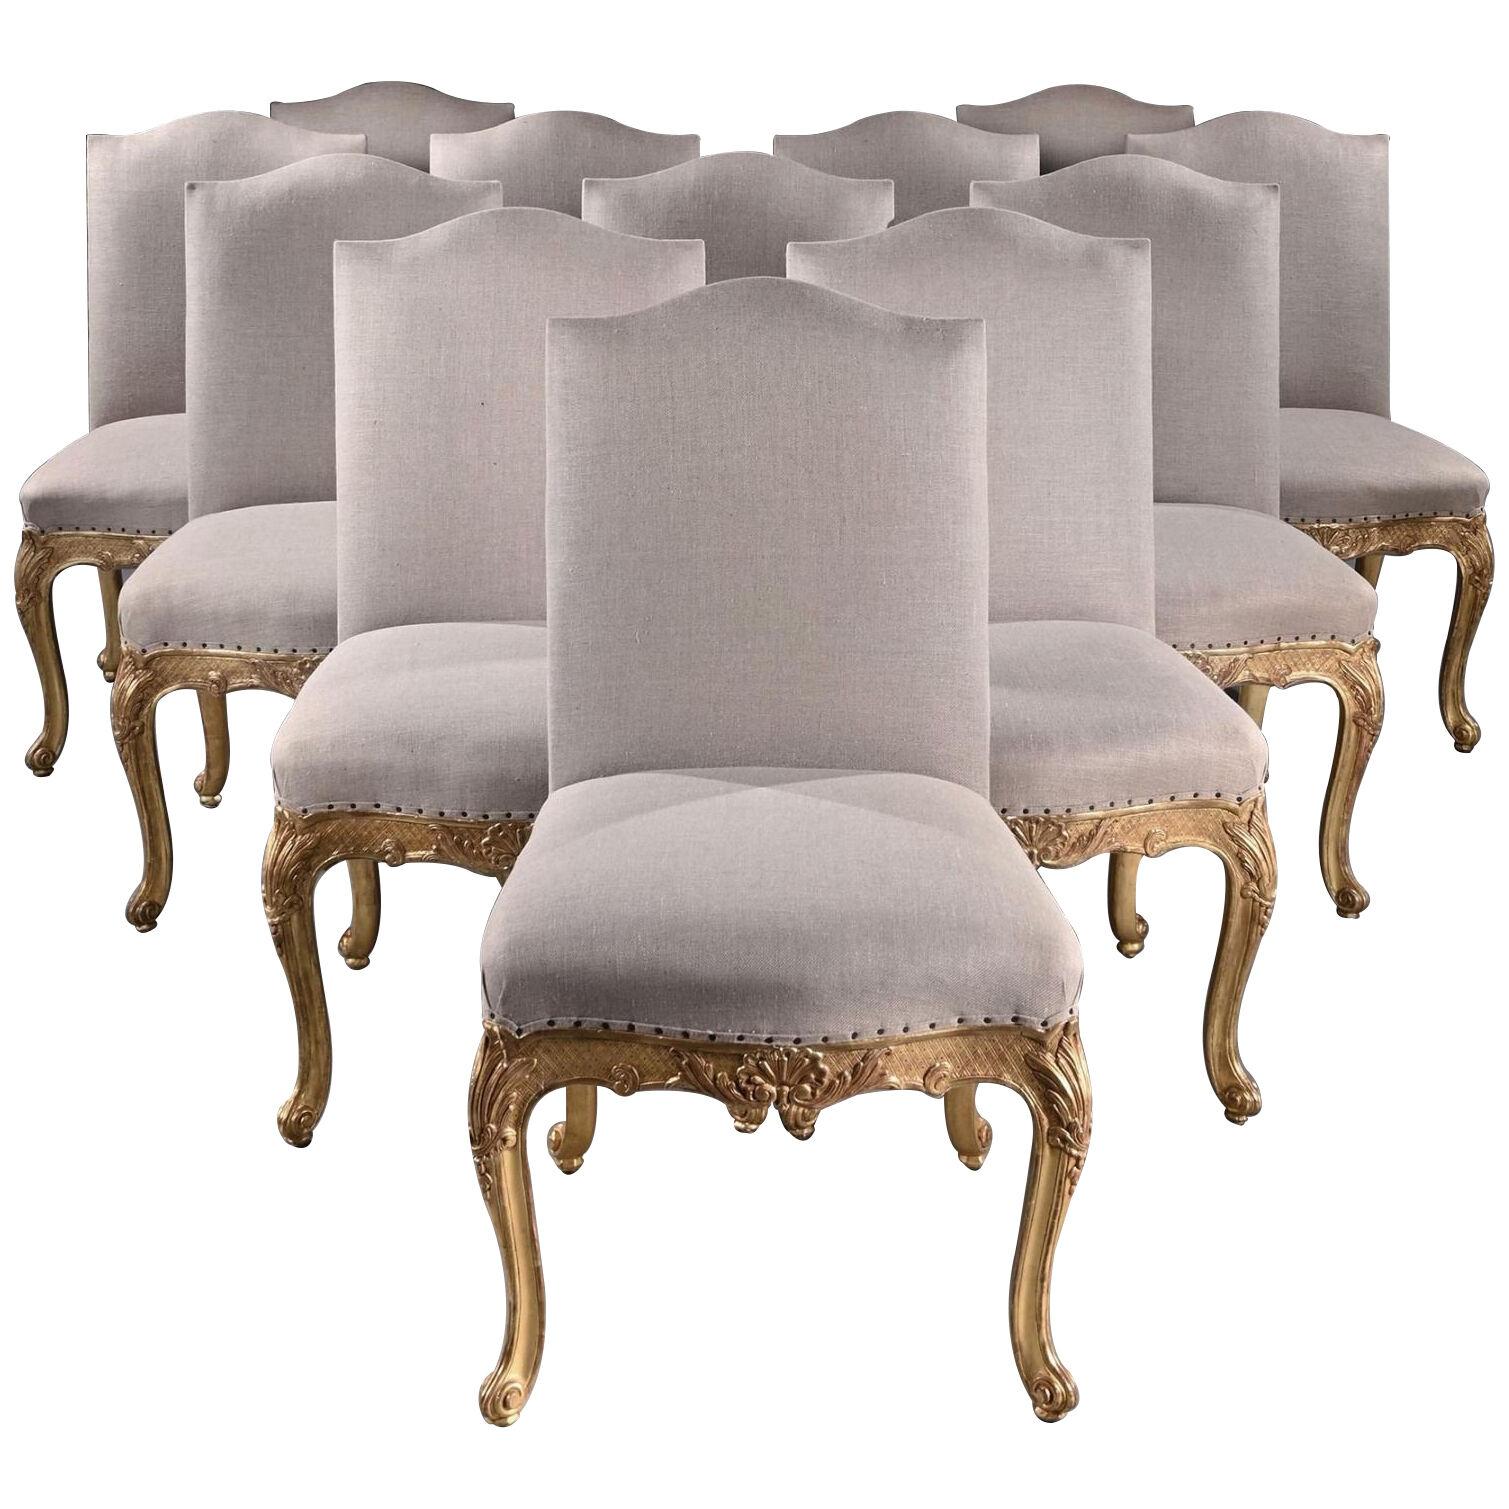 Set of 12 French Louis Xv Style Giltwood Dining Chairs